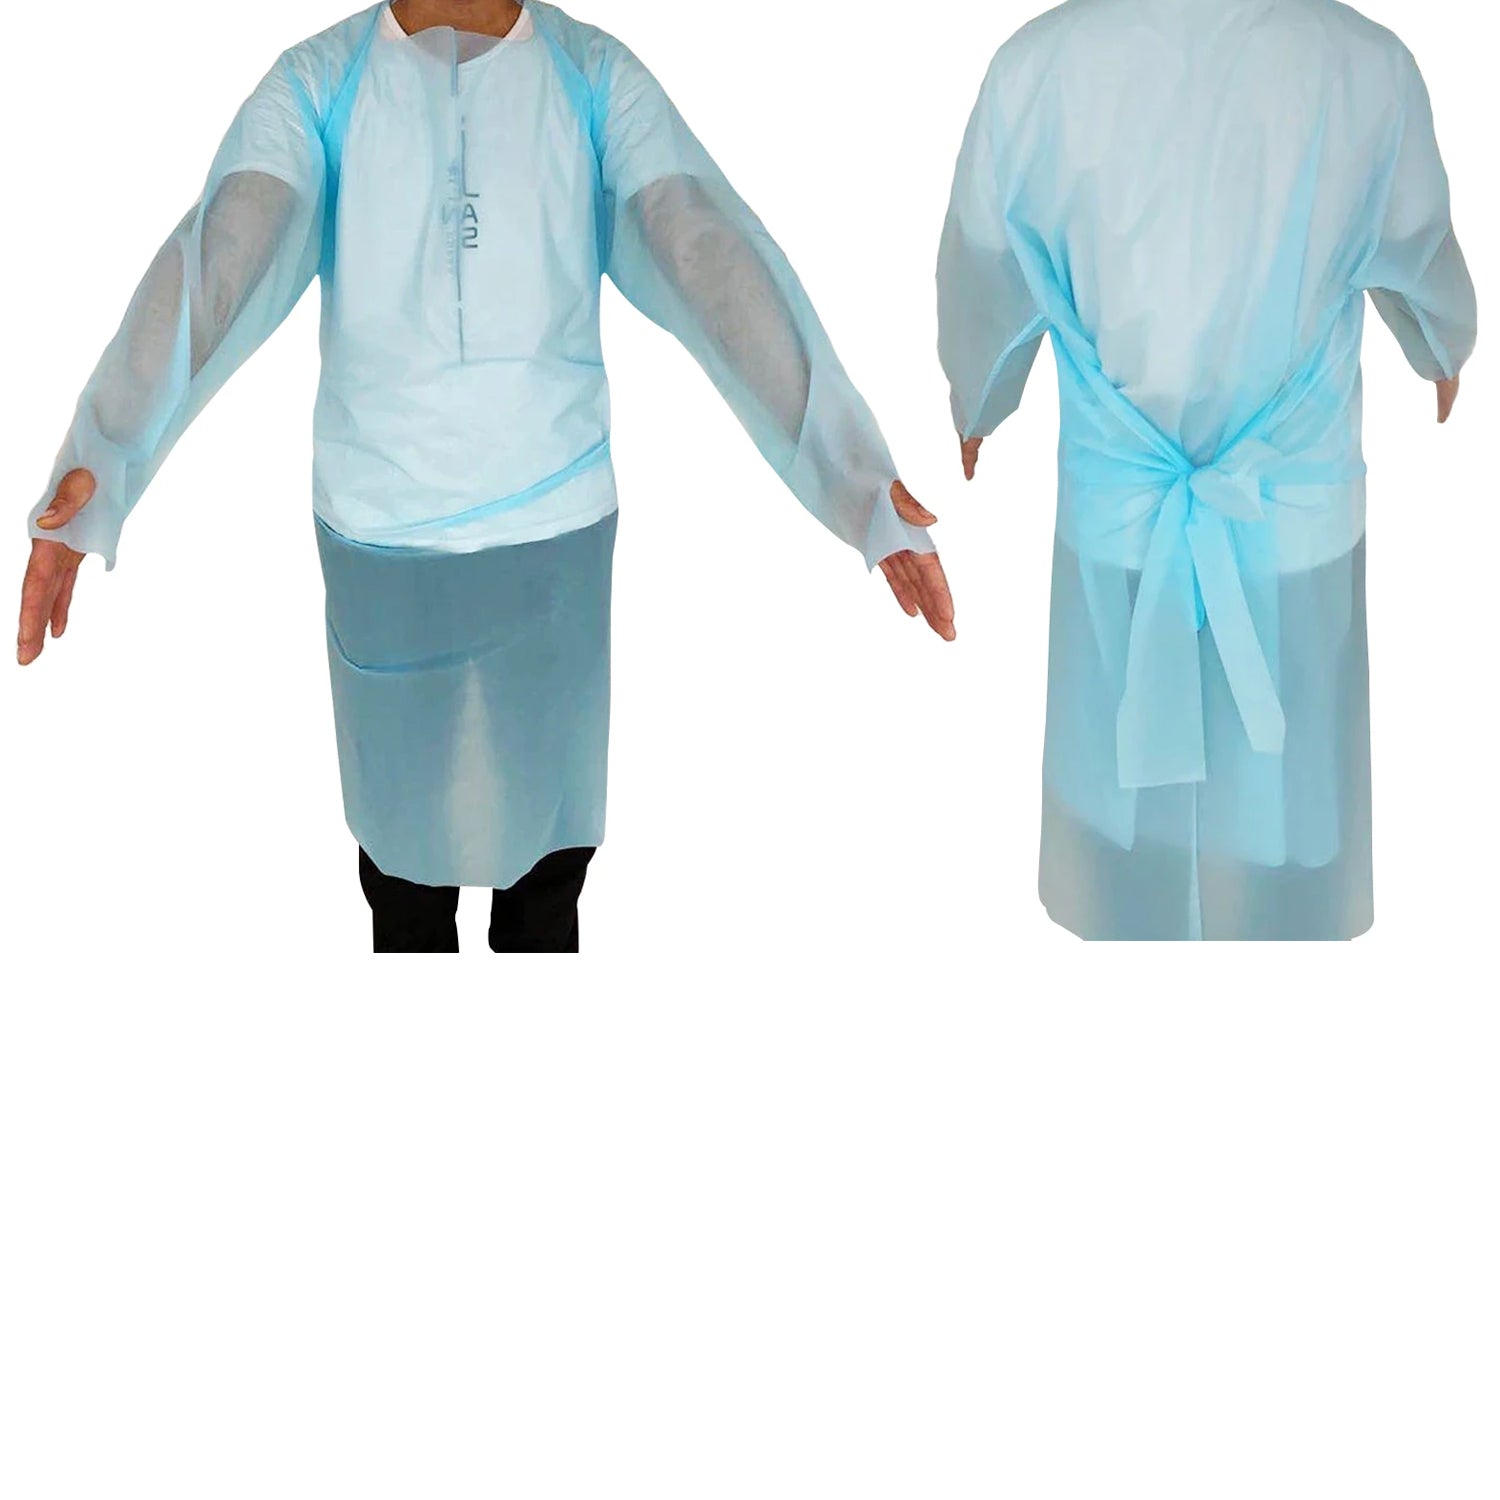 10-Pack: Everyday Use Disposable Protective Gowns Cloak Clothes Cover